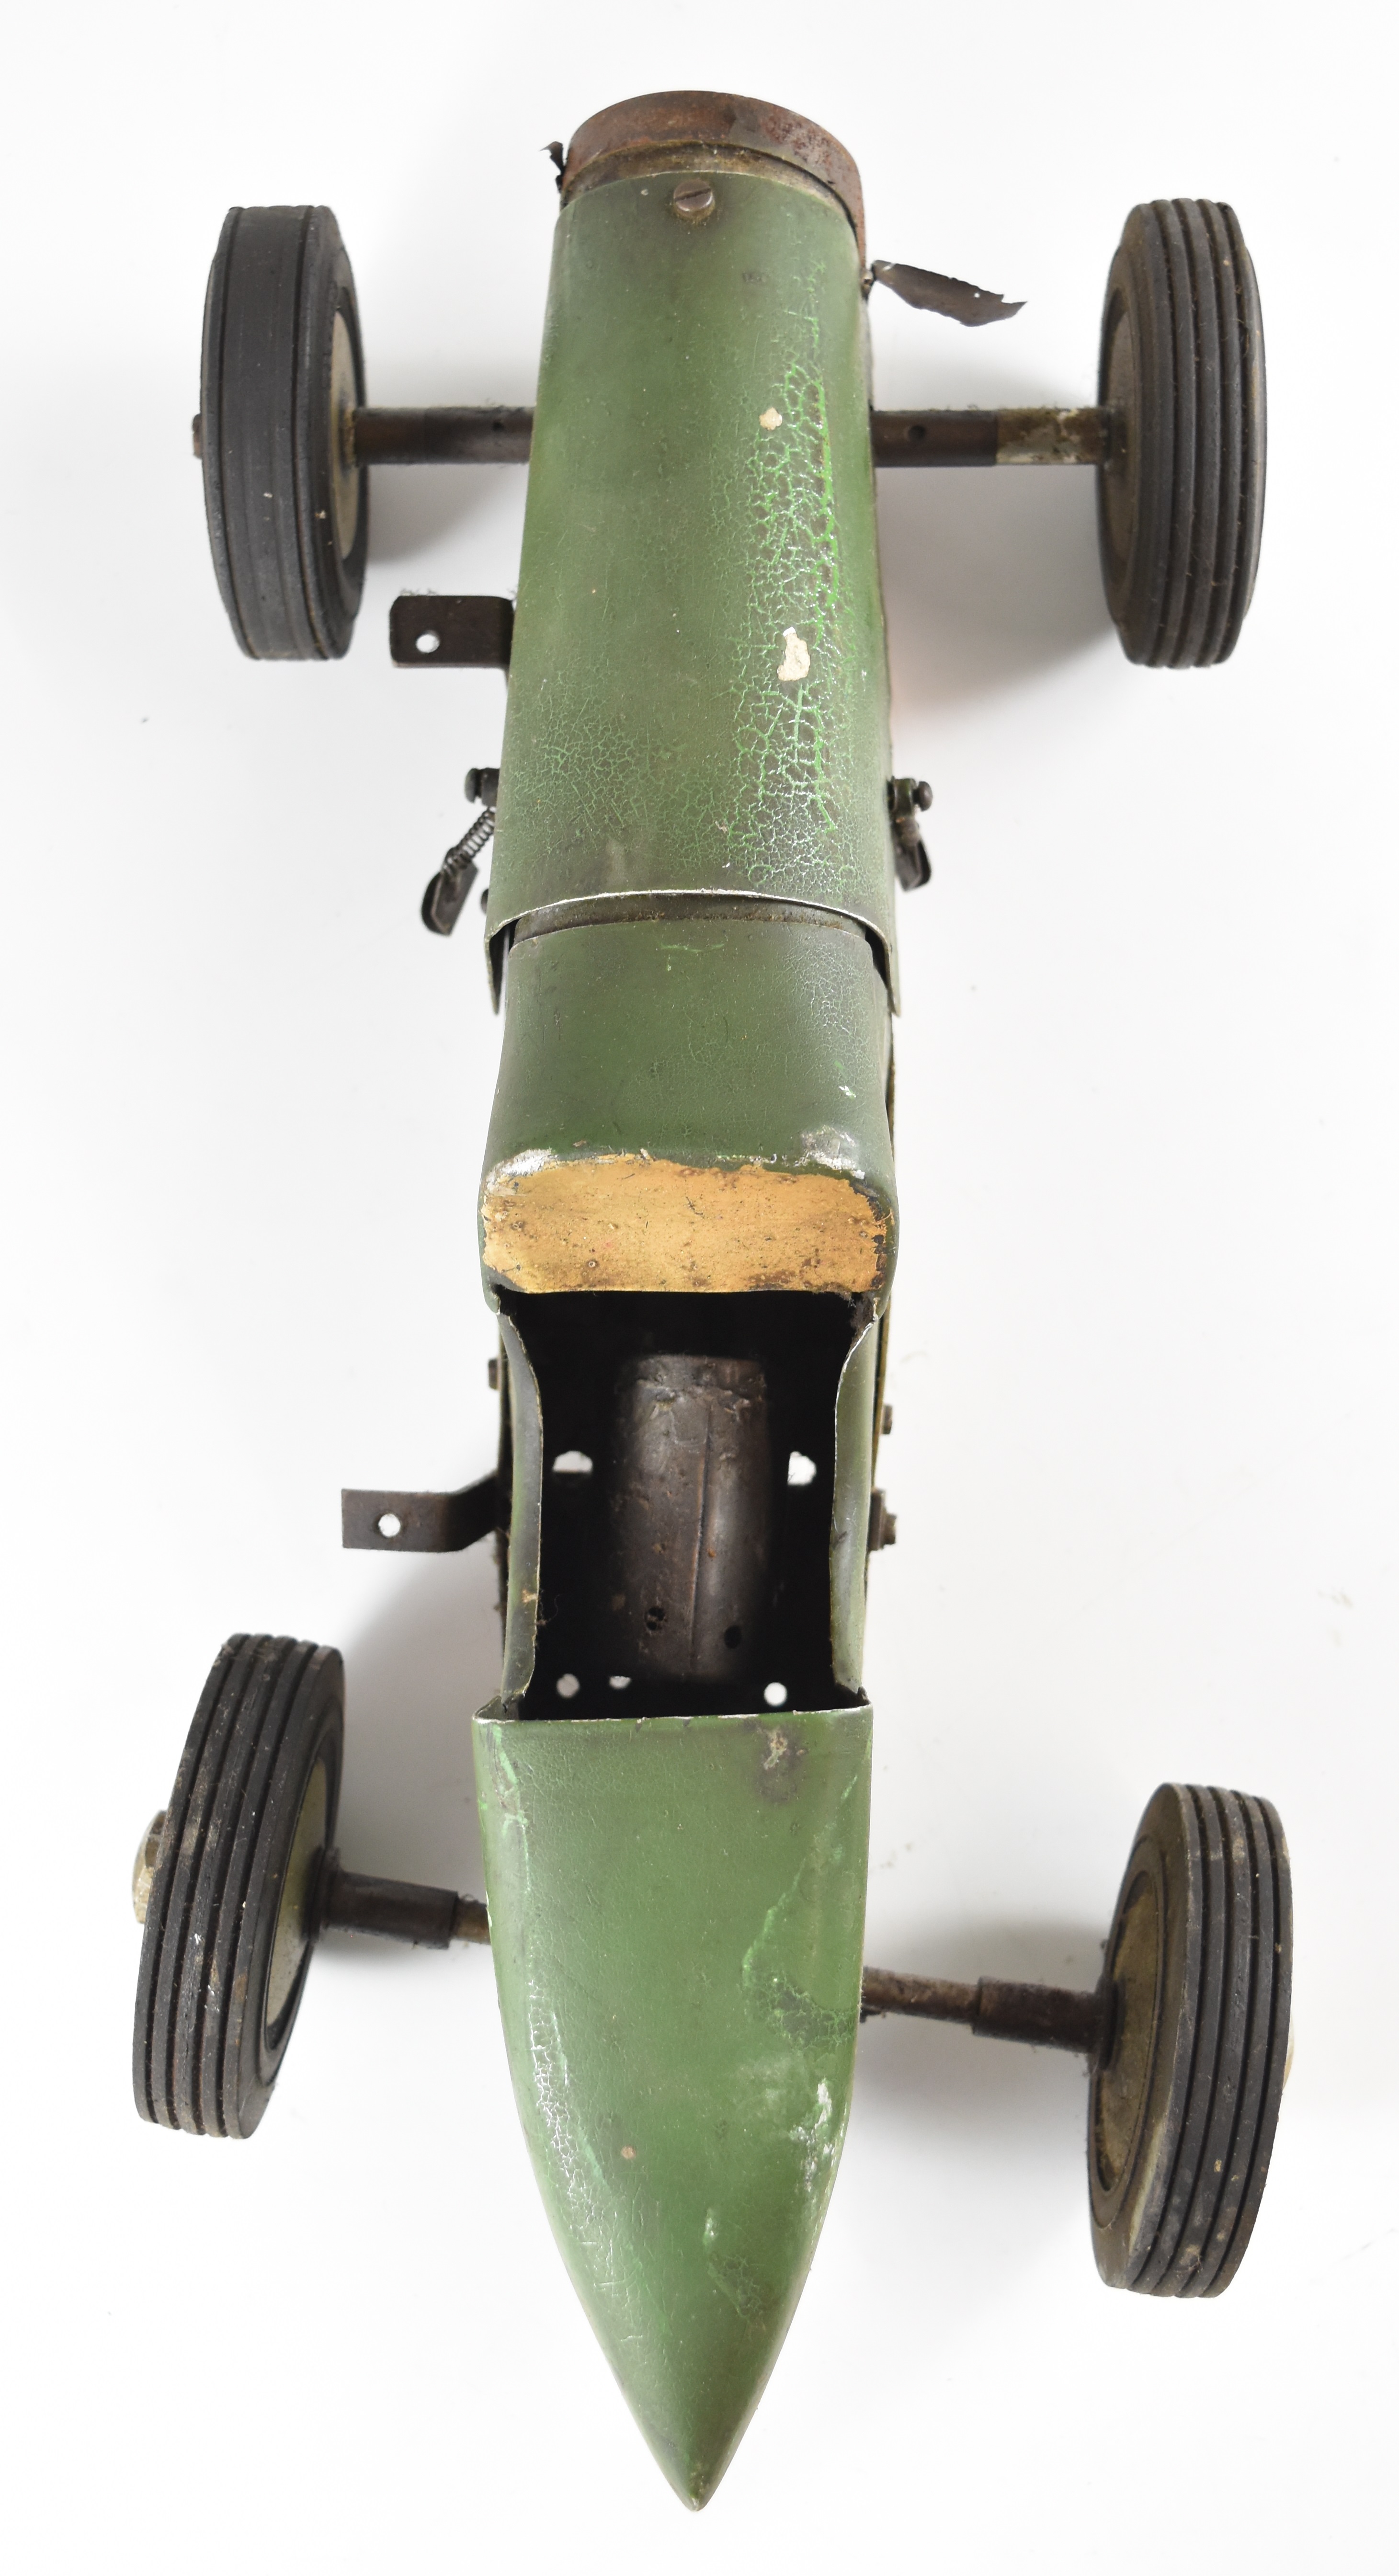 Vintage diesel engine powered model pylon racing car in the style of a 1930s single seat racing car, - Image 4 of 7